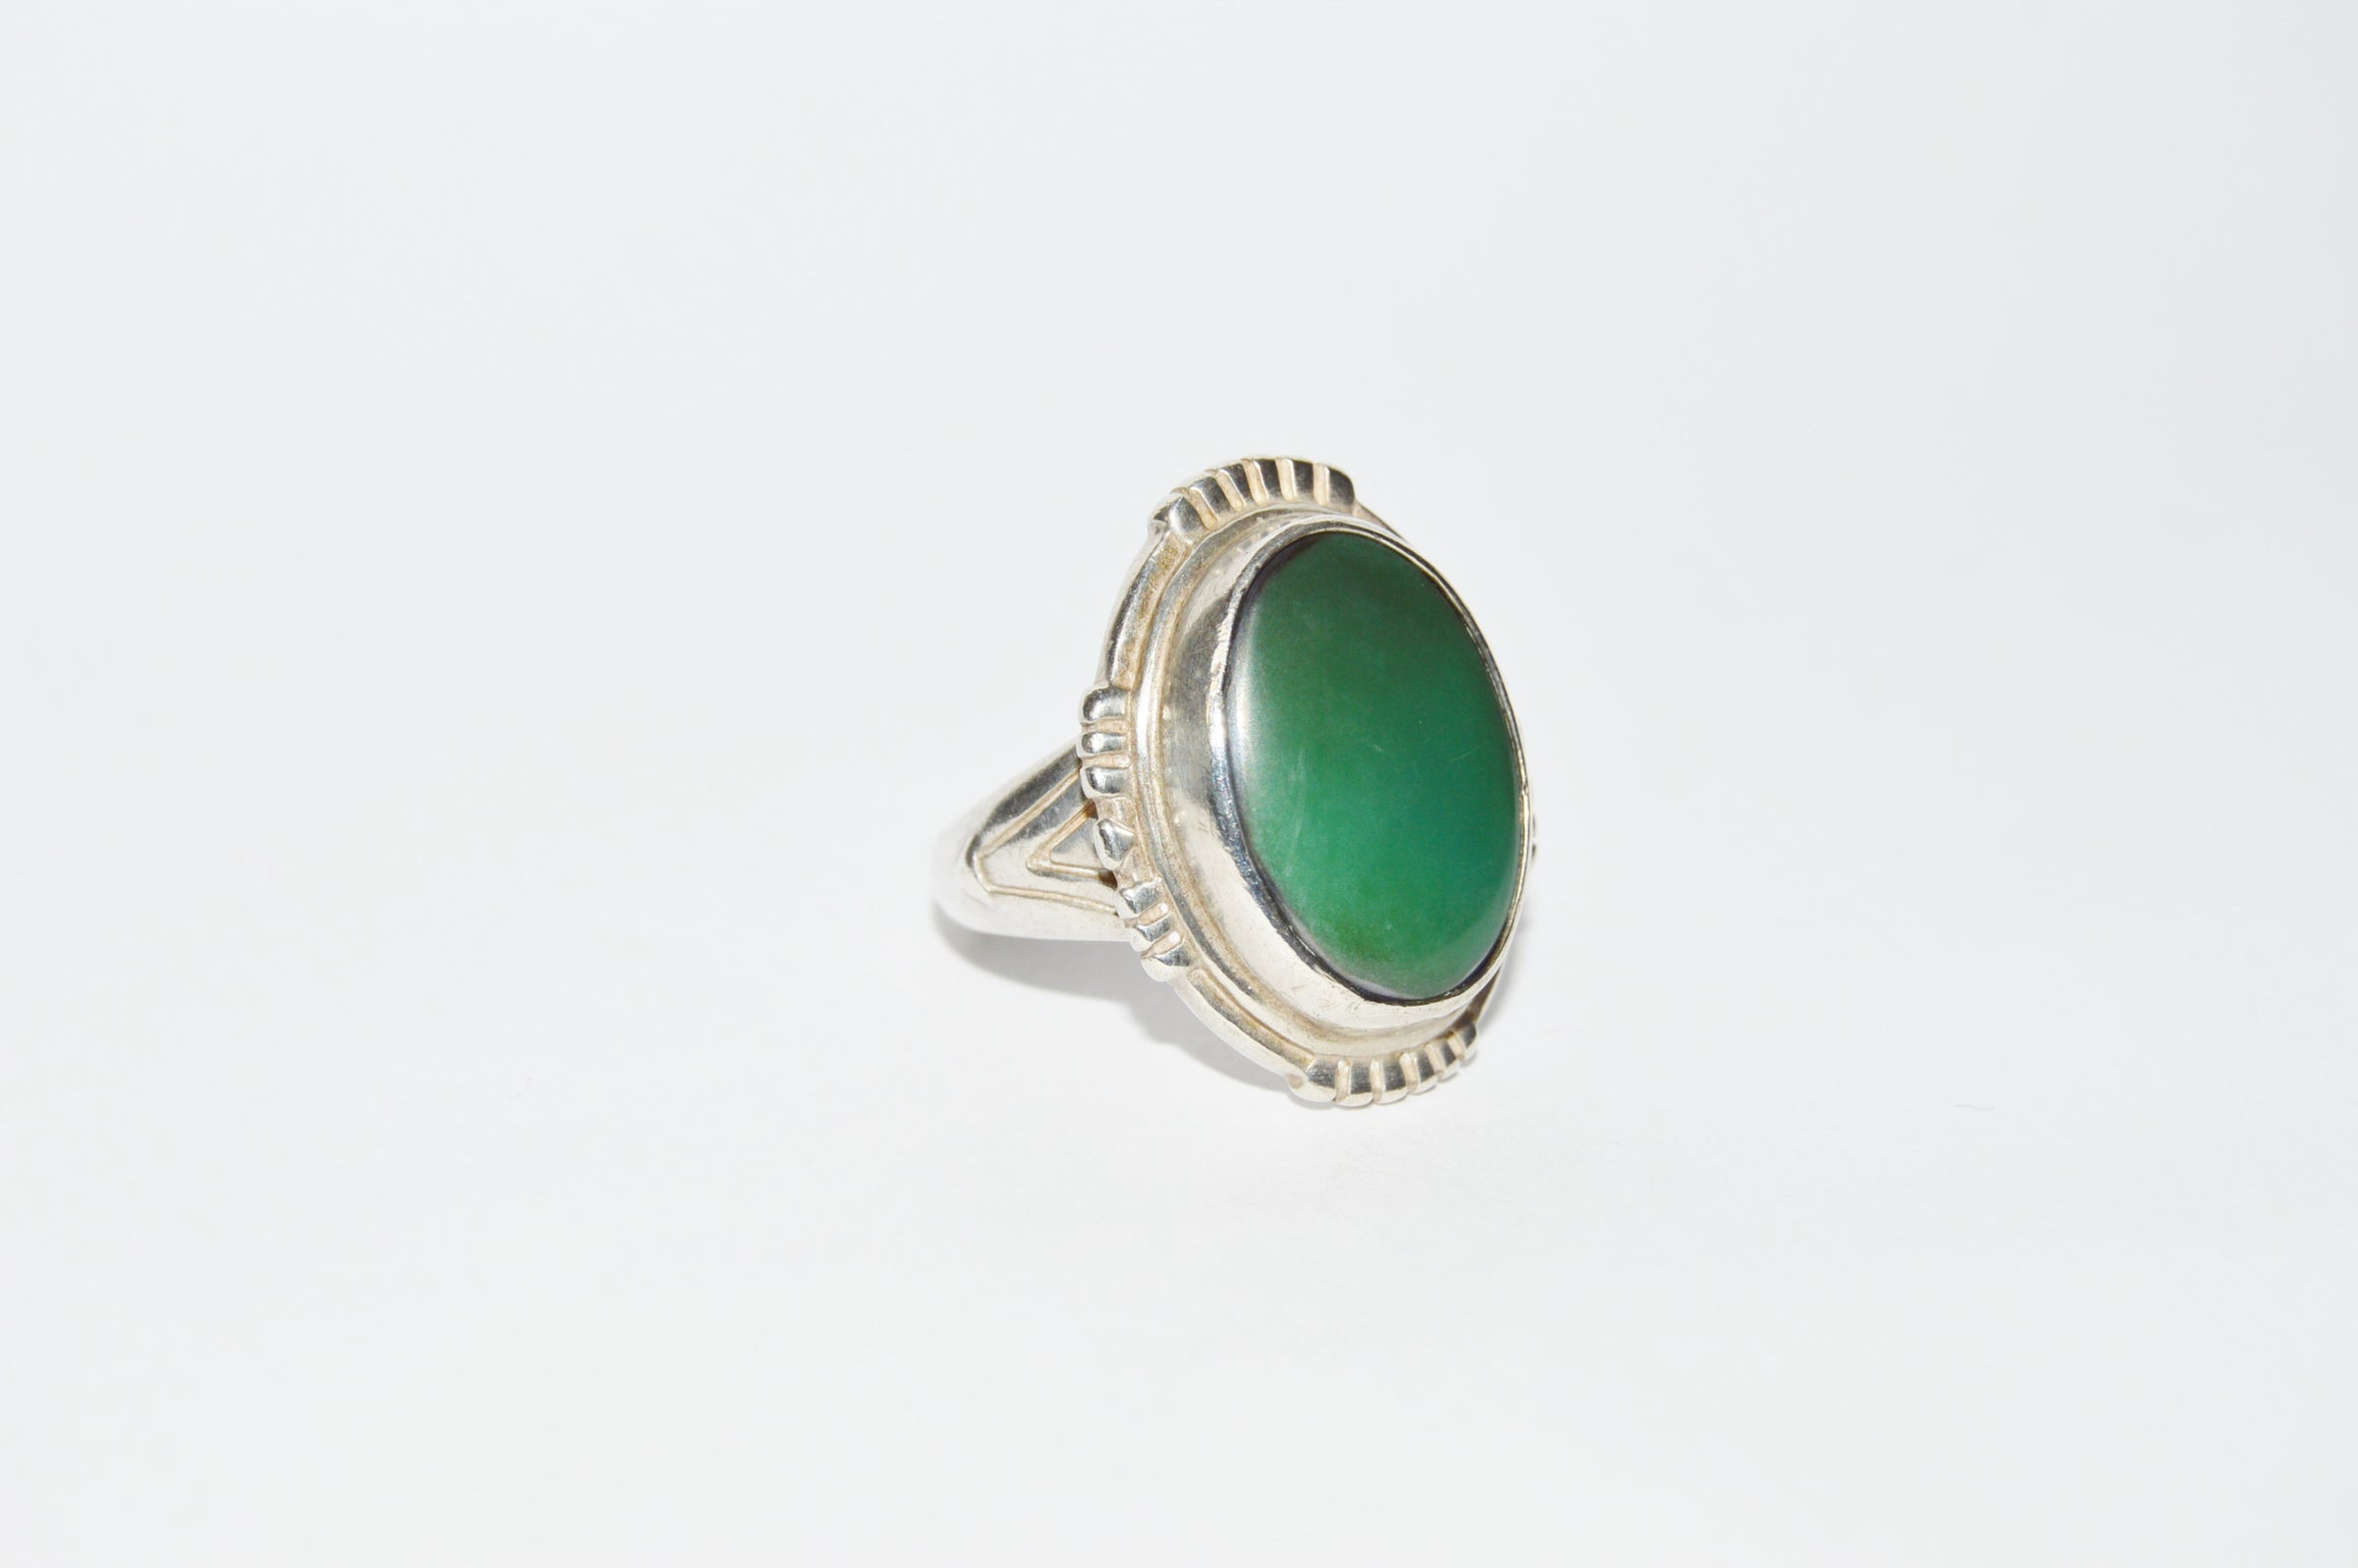 Jade .925 Sterling Silver Ring www.hersandhistreasures.com/collections/sterling-silver-jewelry